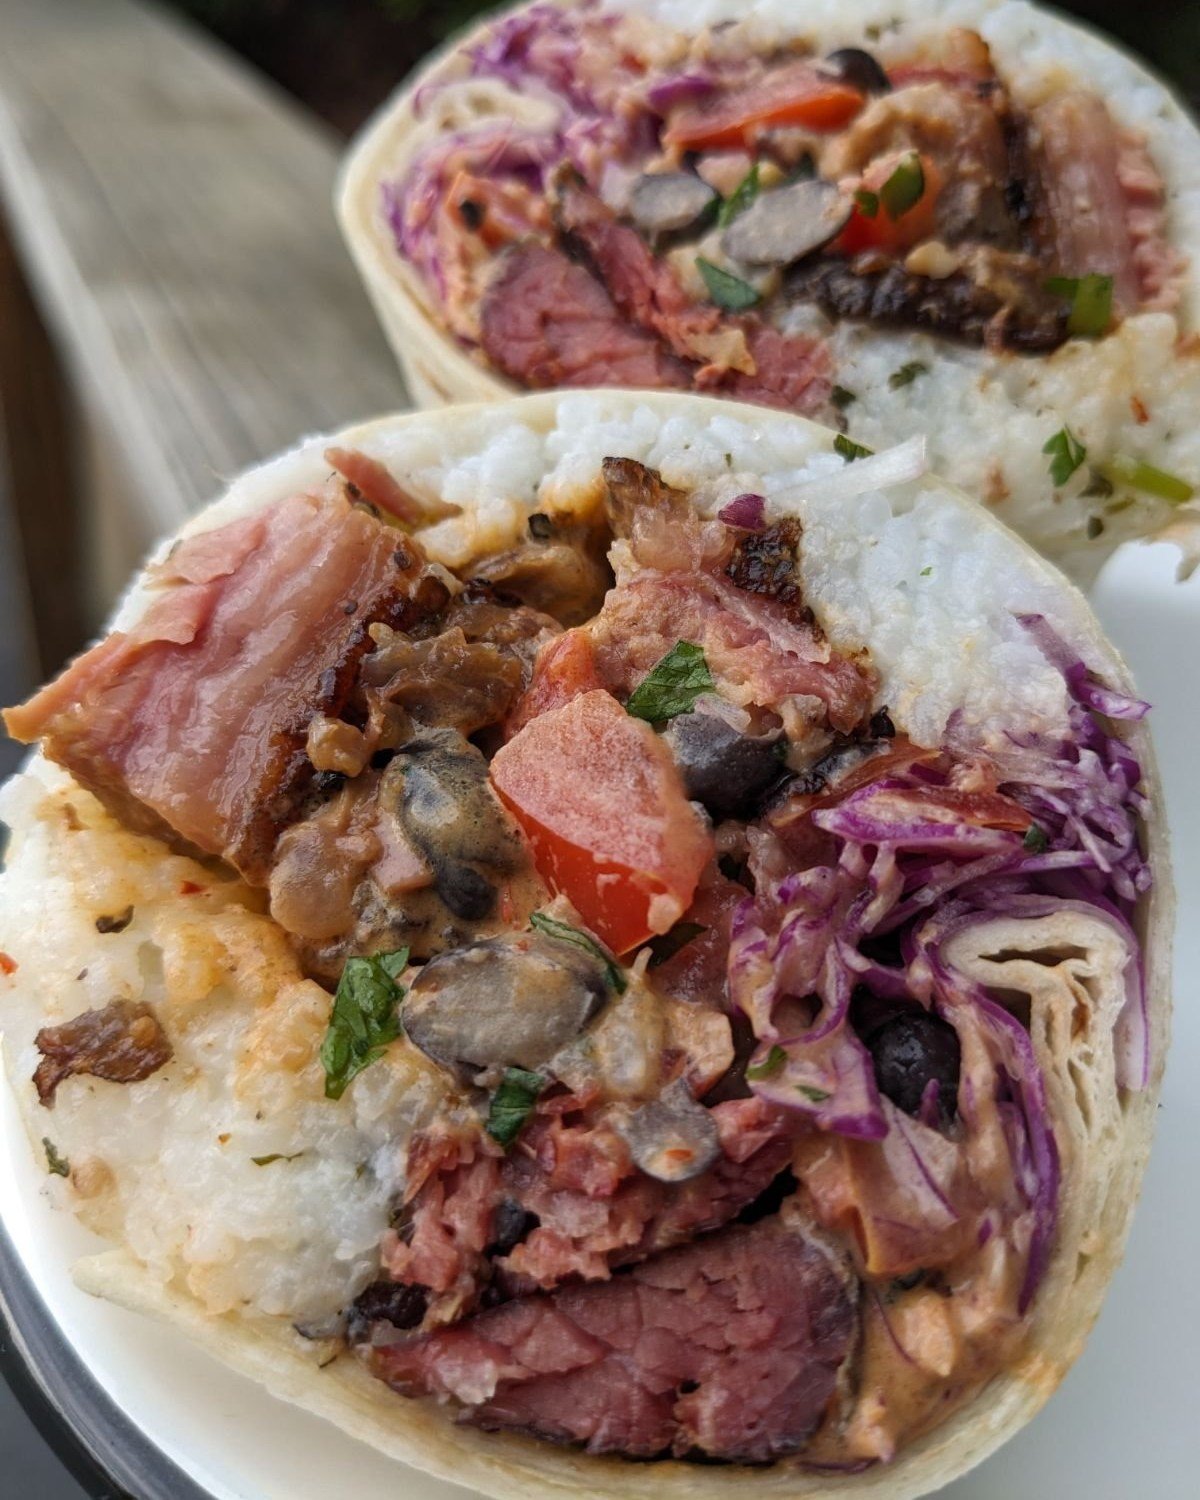 Ask for a Smokehouse burrito and you shall receive a Smokehouse burrito...

WEDNESDAY (4/24) SMOKEHOUSE SPECIAL
ALL DAY- - -  Burnt Ends Burrito, chipotle crema, black bean pico, shaved cabbage, cilantro lime rice.
Burnt ends are limited, once we run